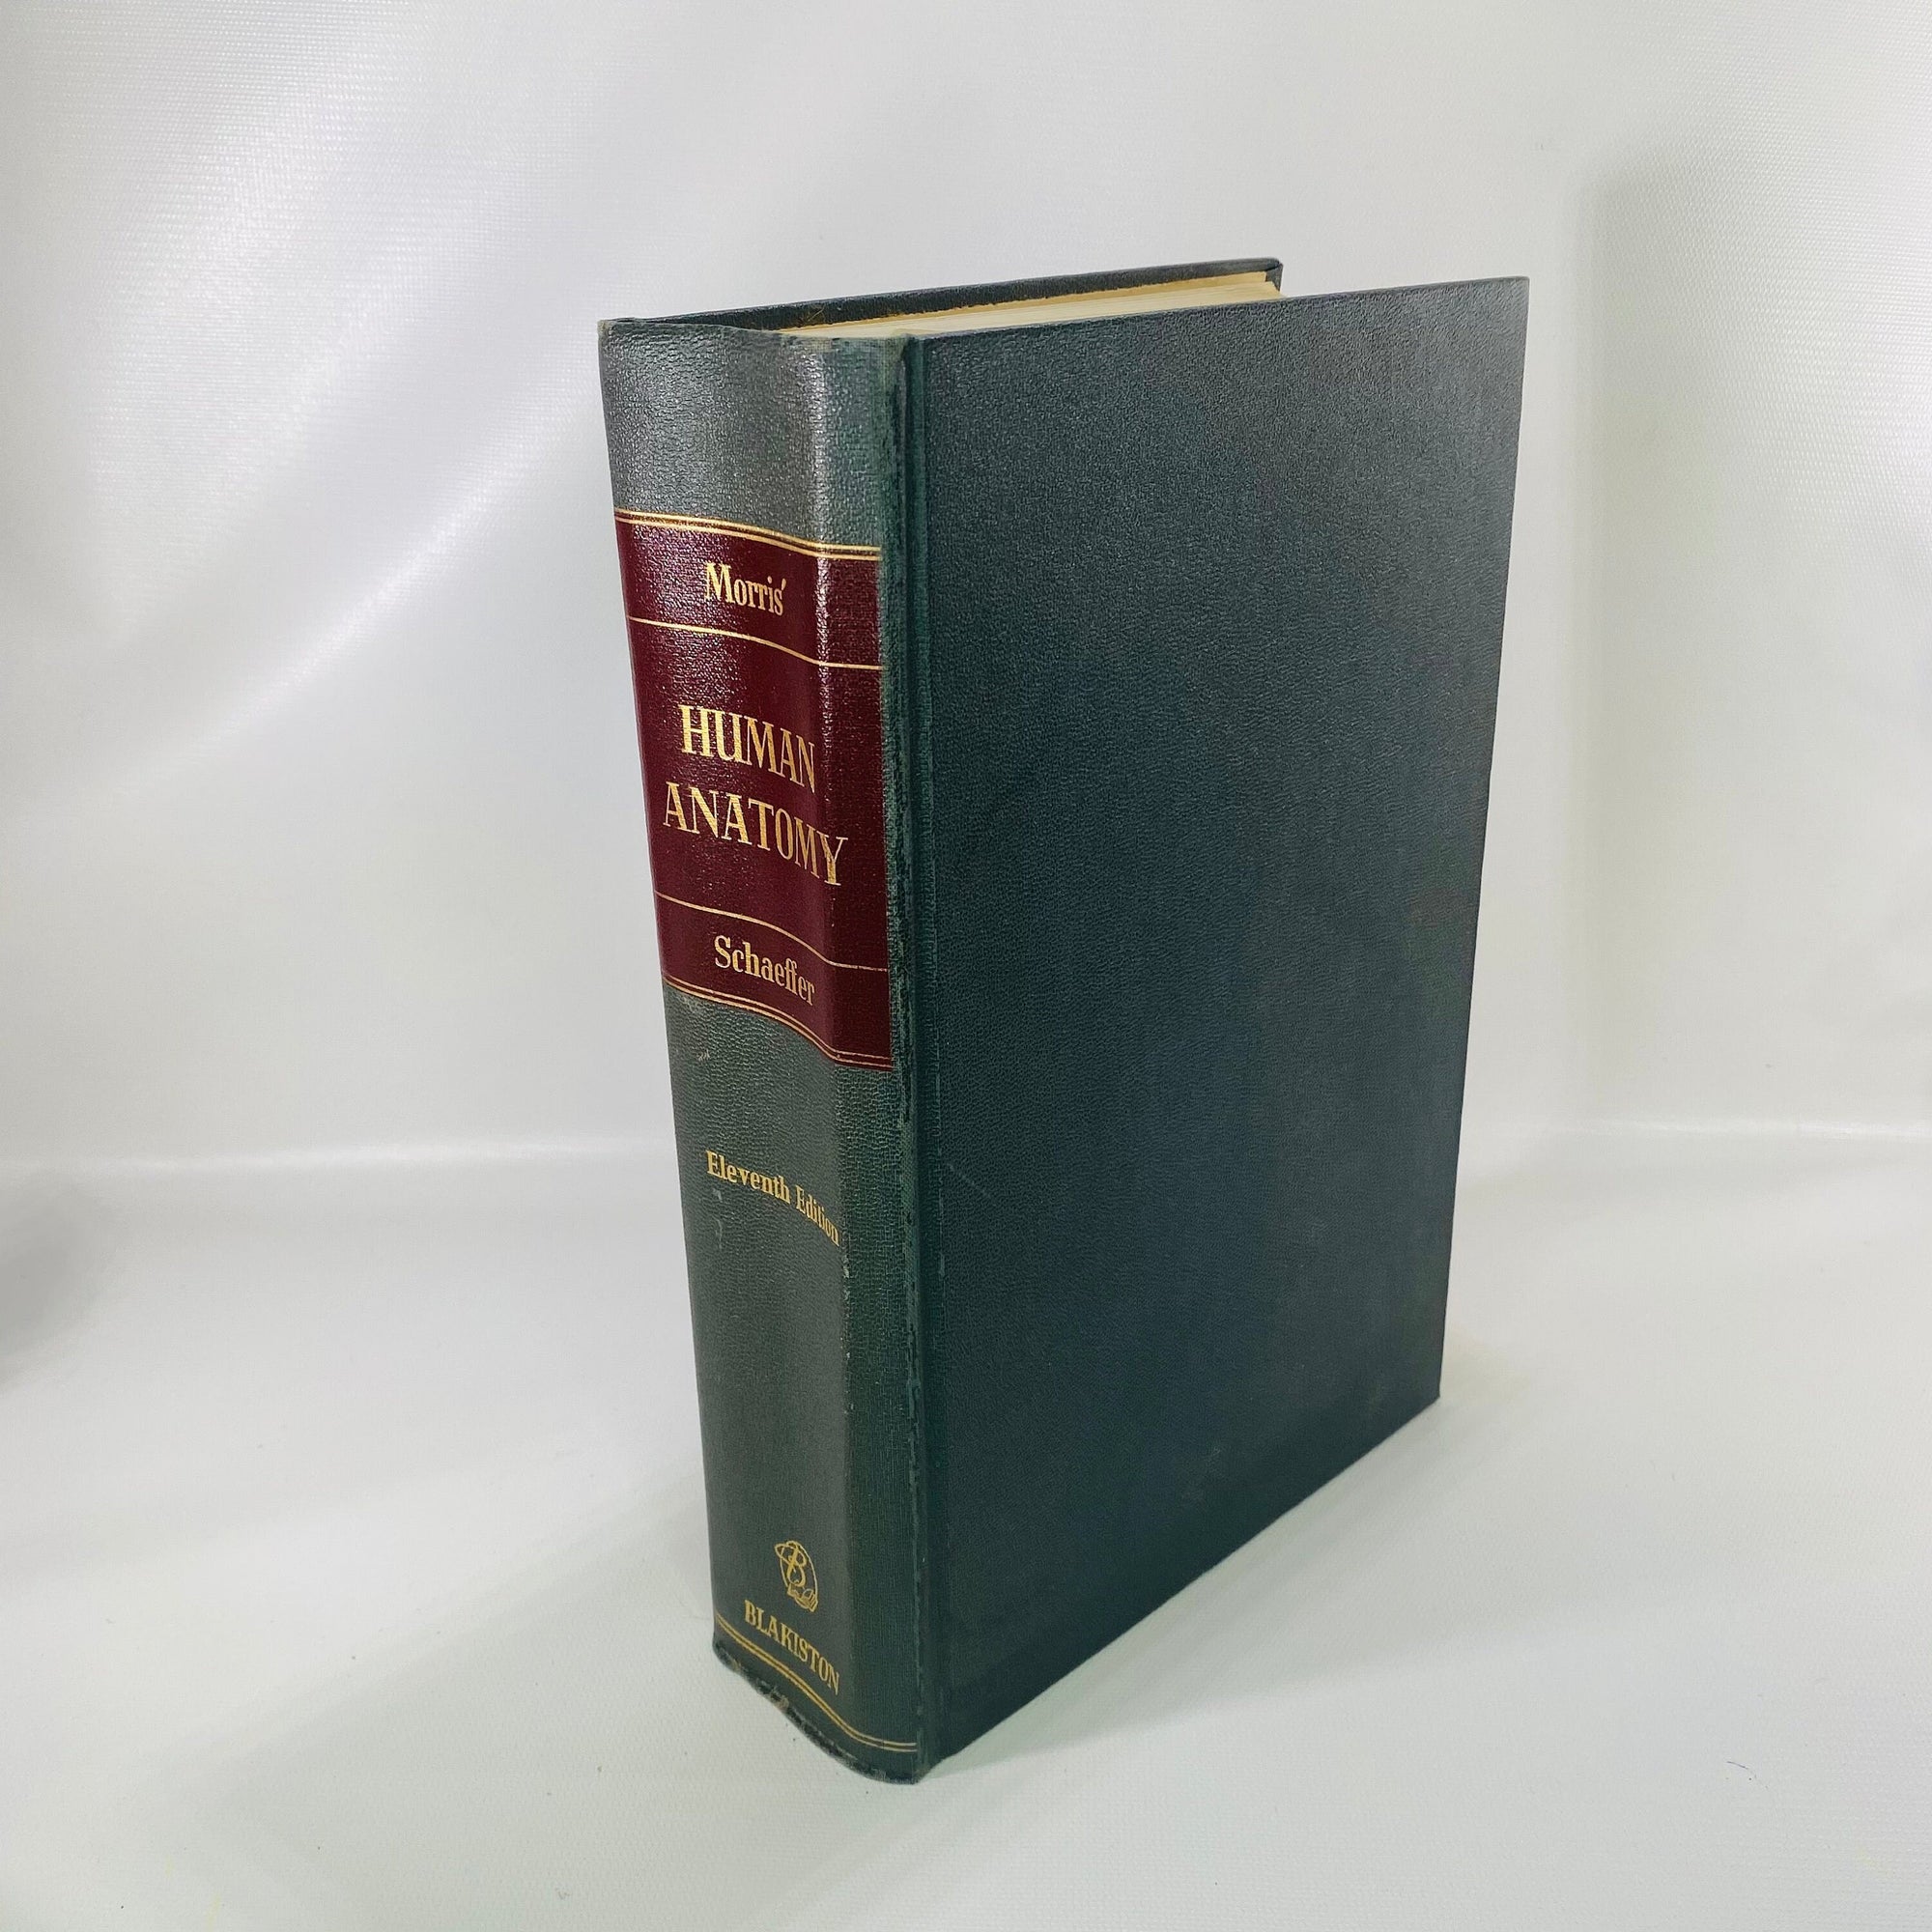 Morris The Human Anatomy A Complete Systematic Treatise edited by J. Parsons Schaeffer 1953 Blackstone Company Vintage Book